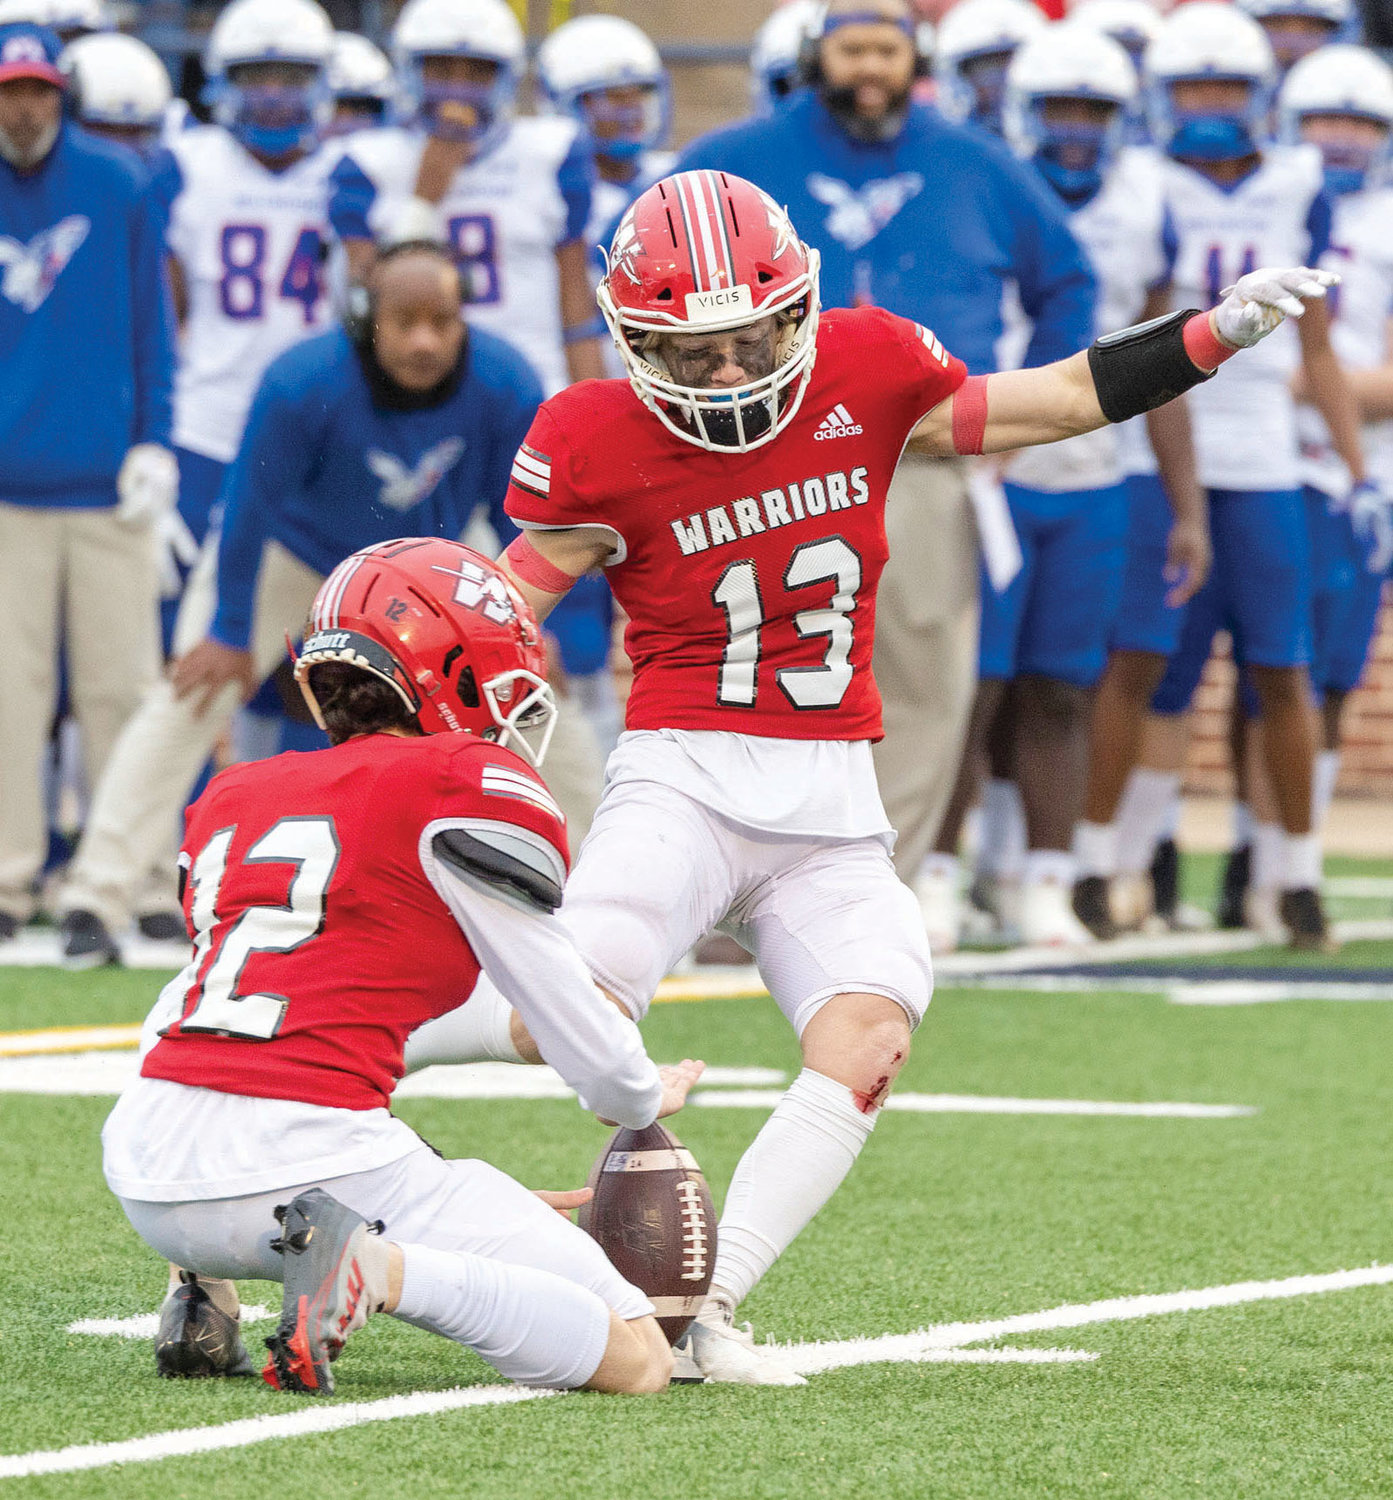 Washington sophomore Mayson Thomas (13) kicks a 25-yard field goal in the Warriors’ 17-14 State championship win over Millwood Saturday. Tatum Wilk (12) was the holder. Thomas was also good on two point after attempts.